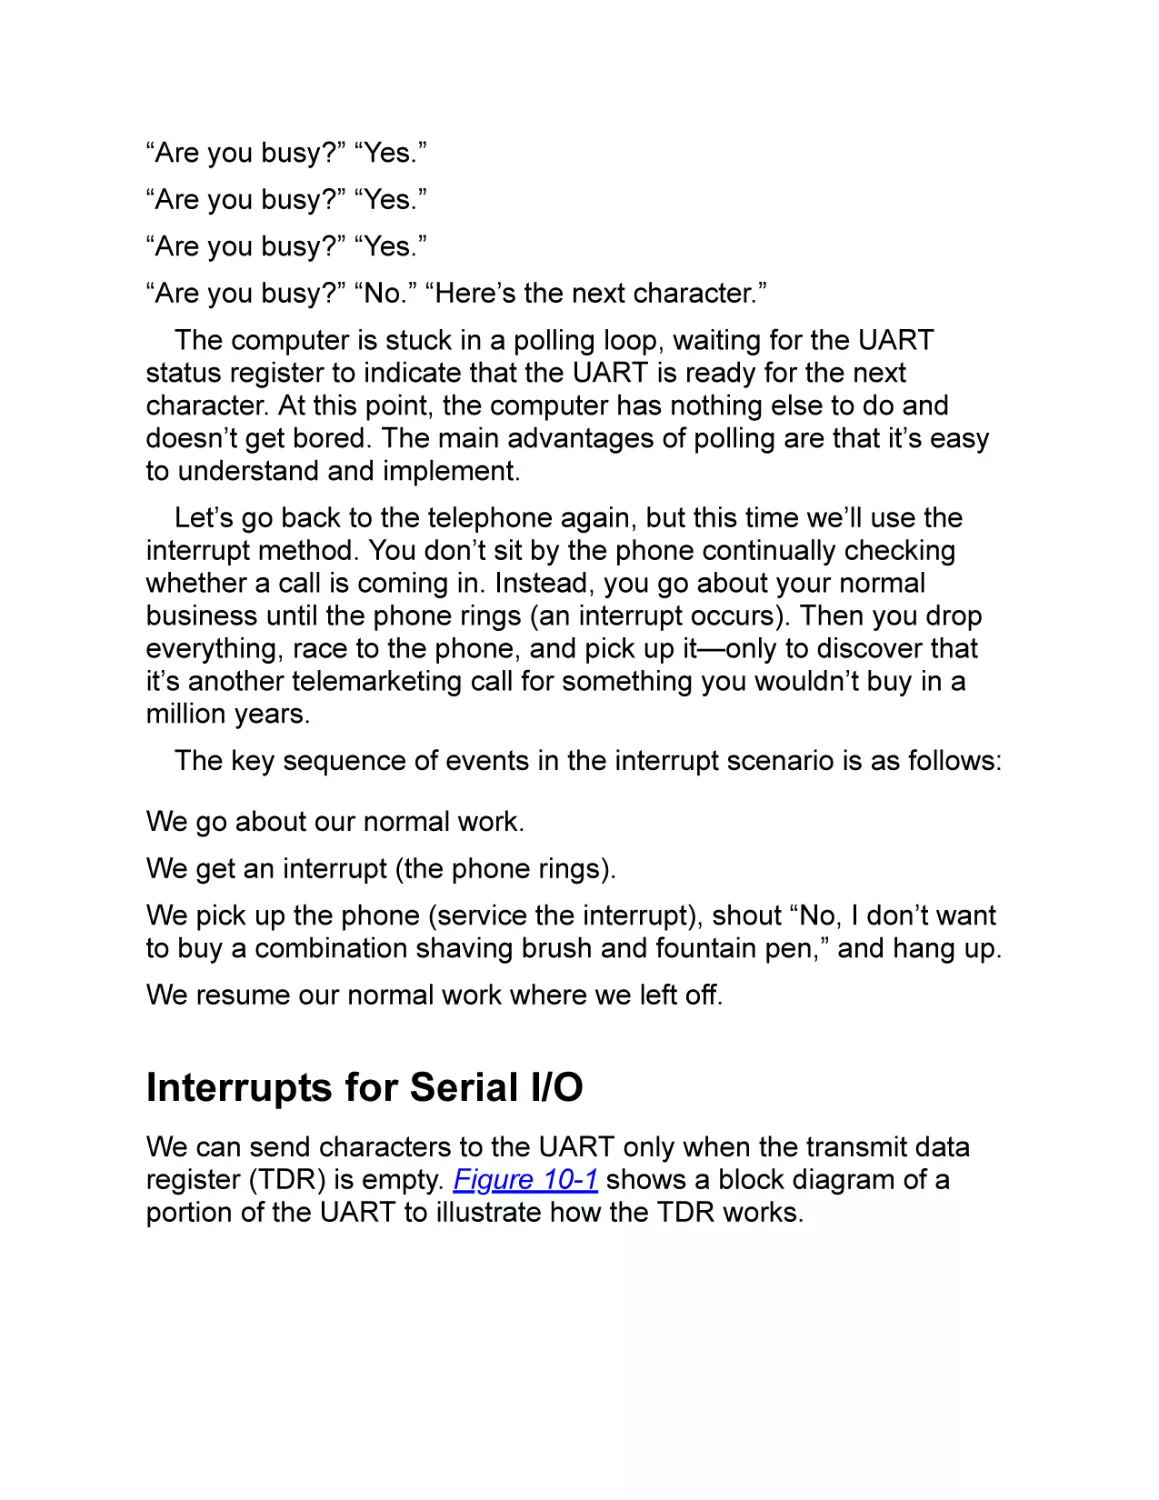 Interrupts for Serial I/O